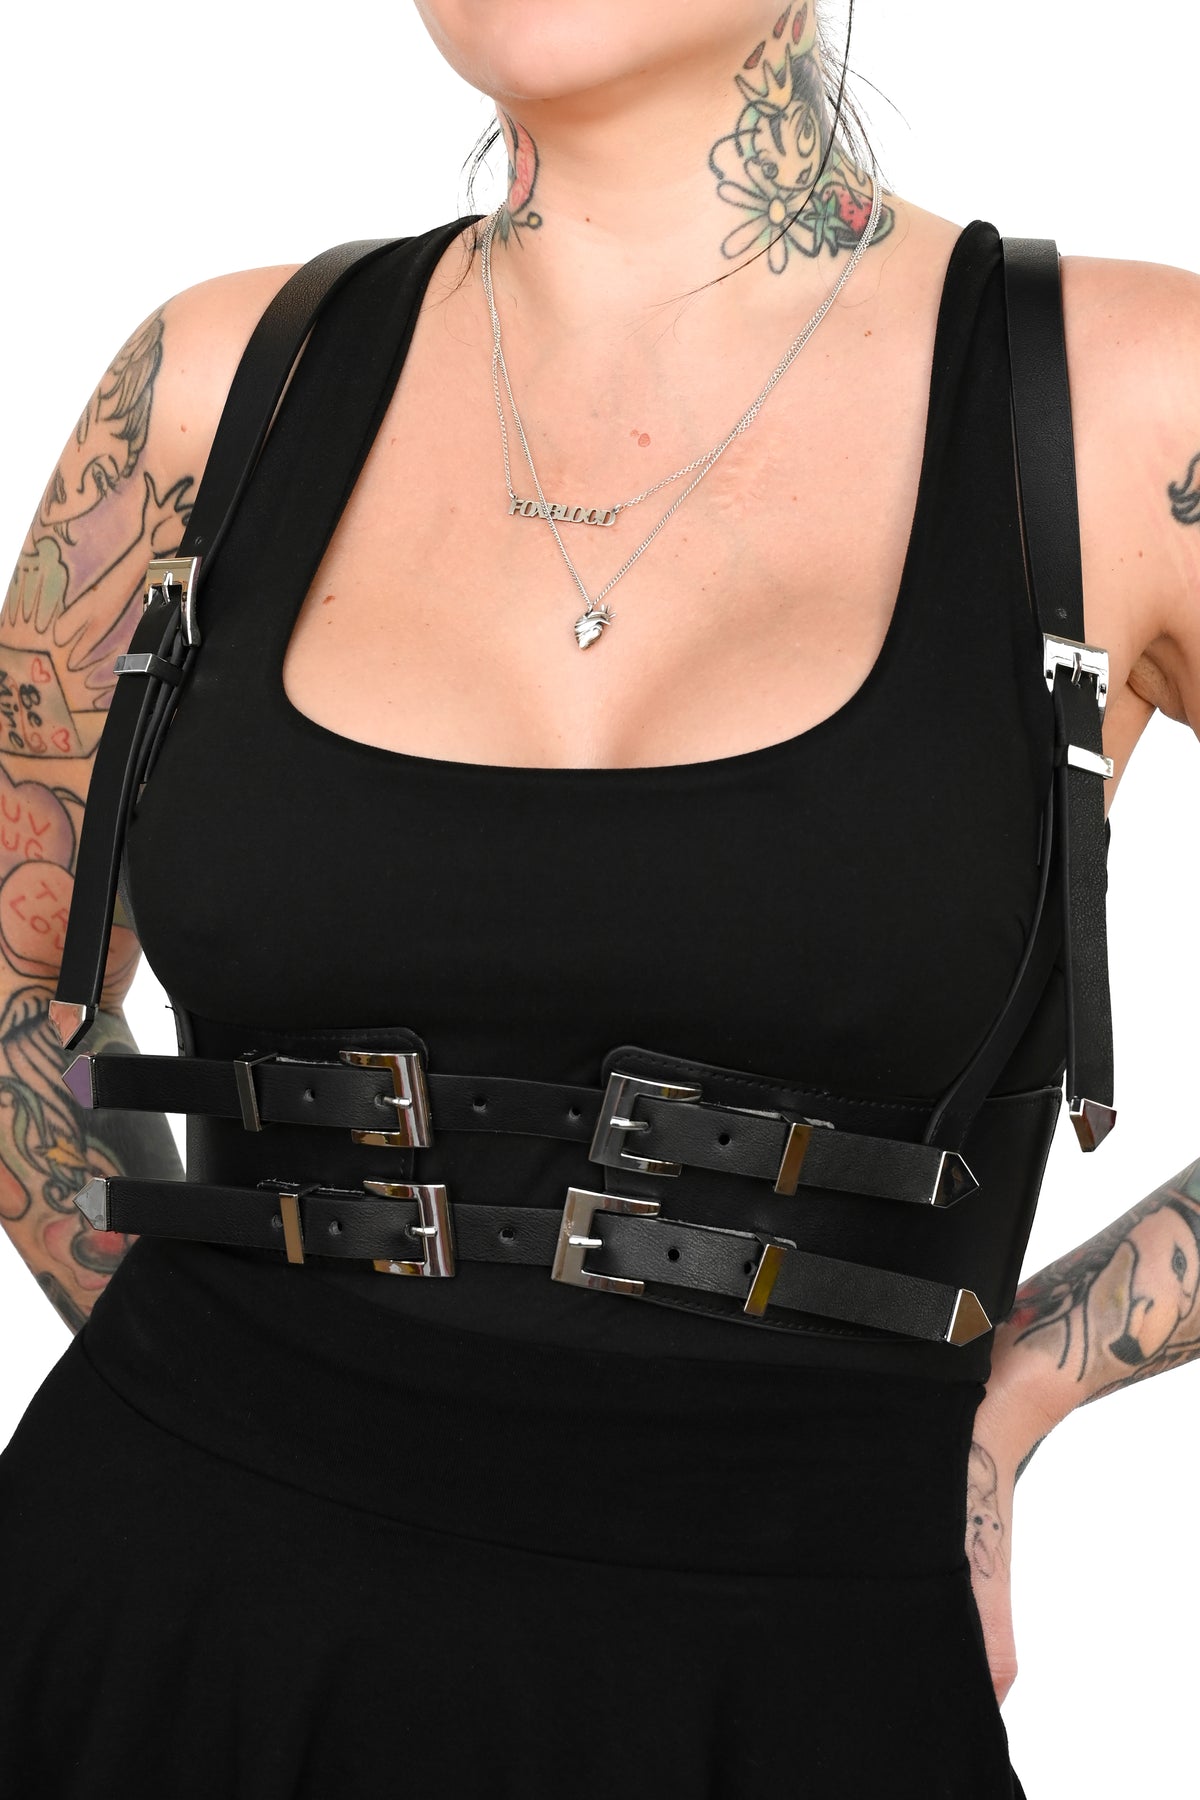  harness belt with elastic back, adjustable front and arm straps.